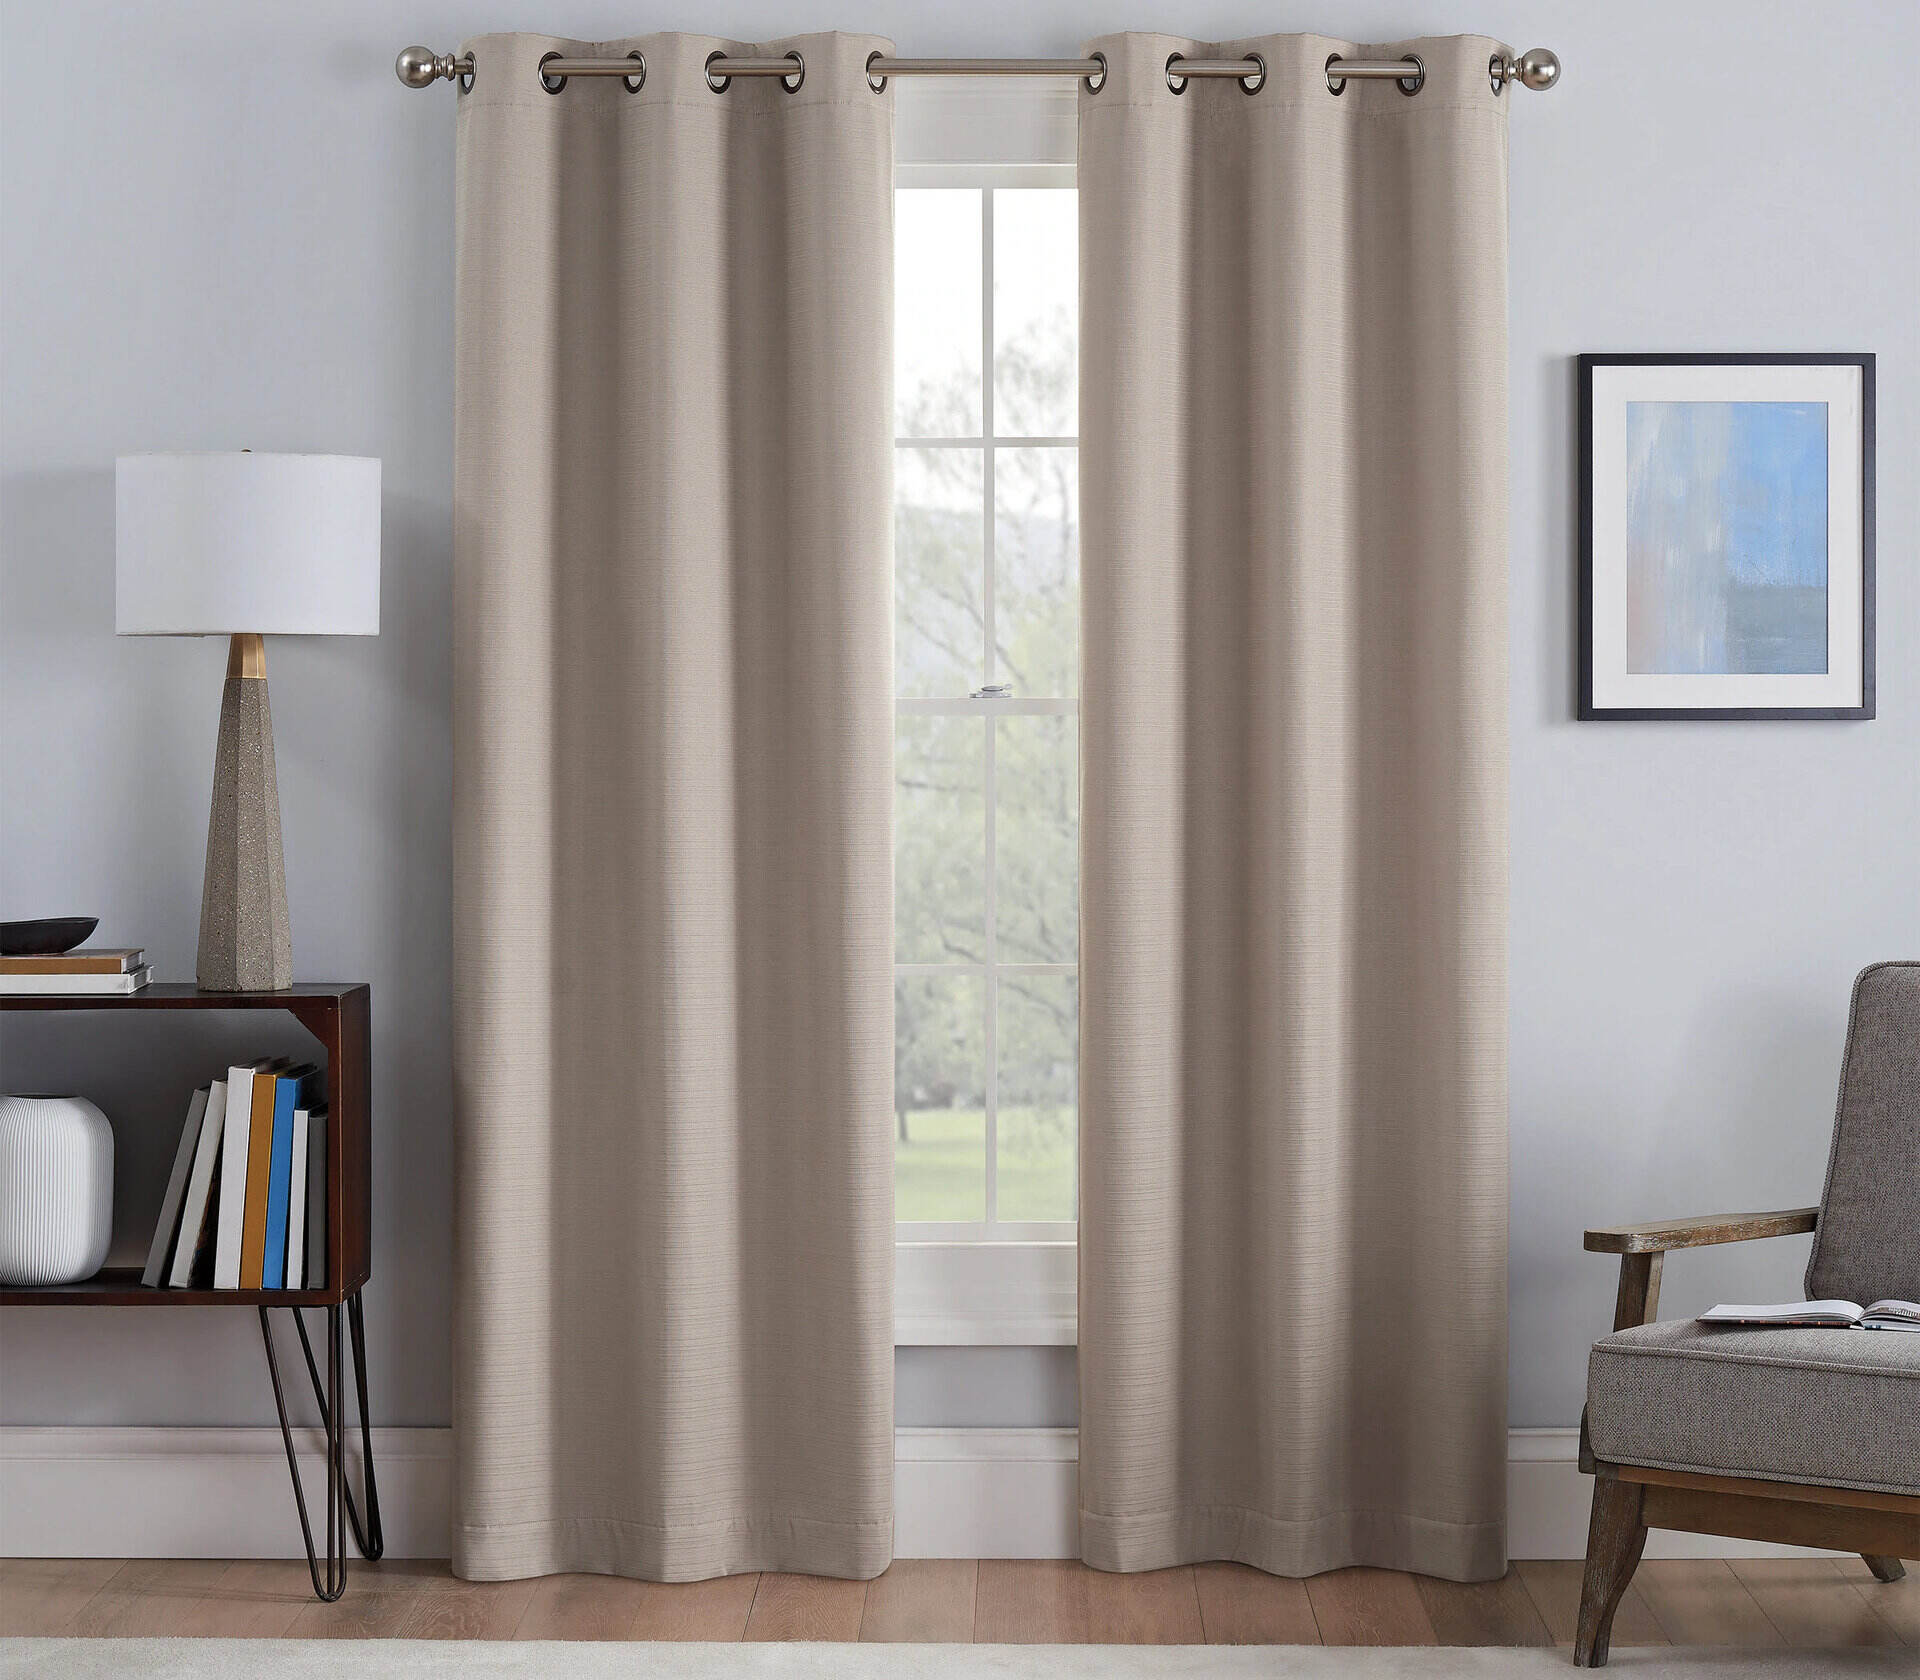 What Are Grommet Curtains